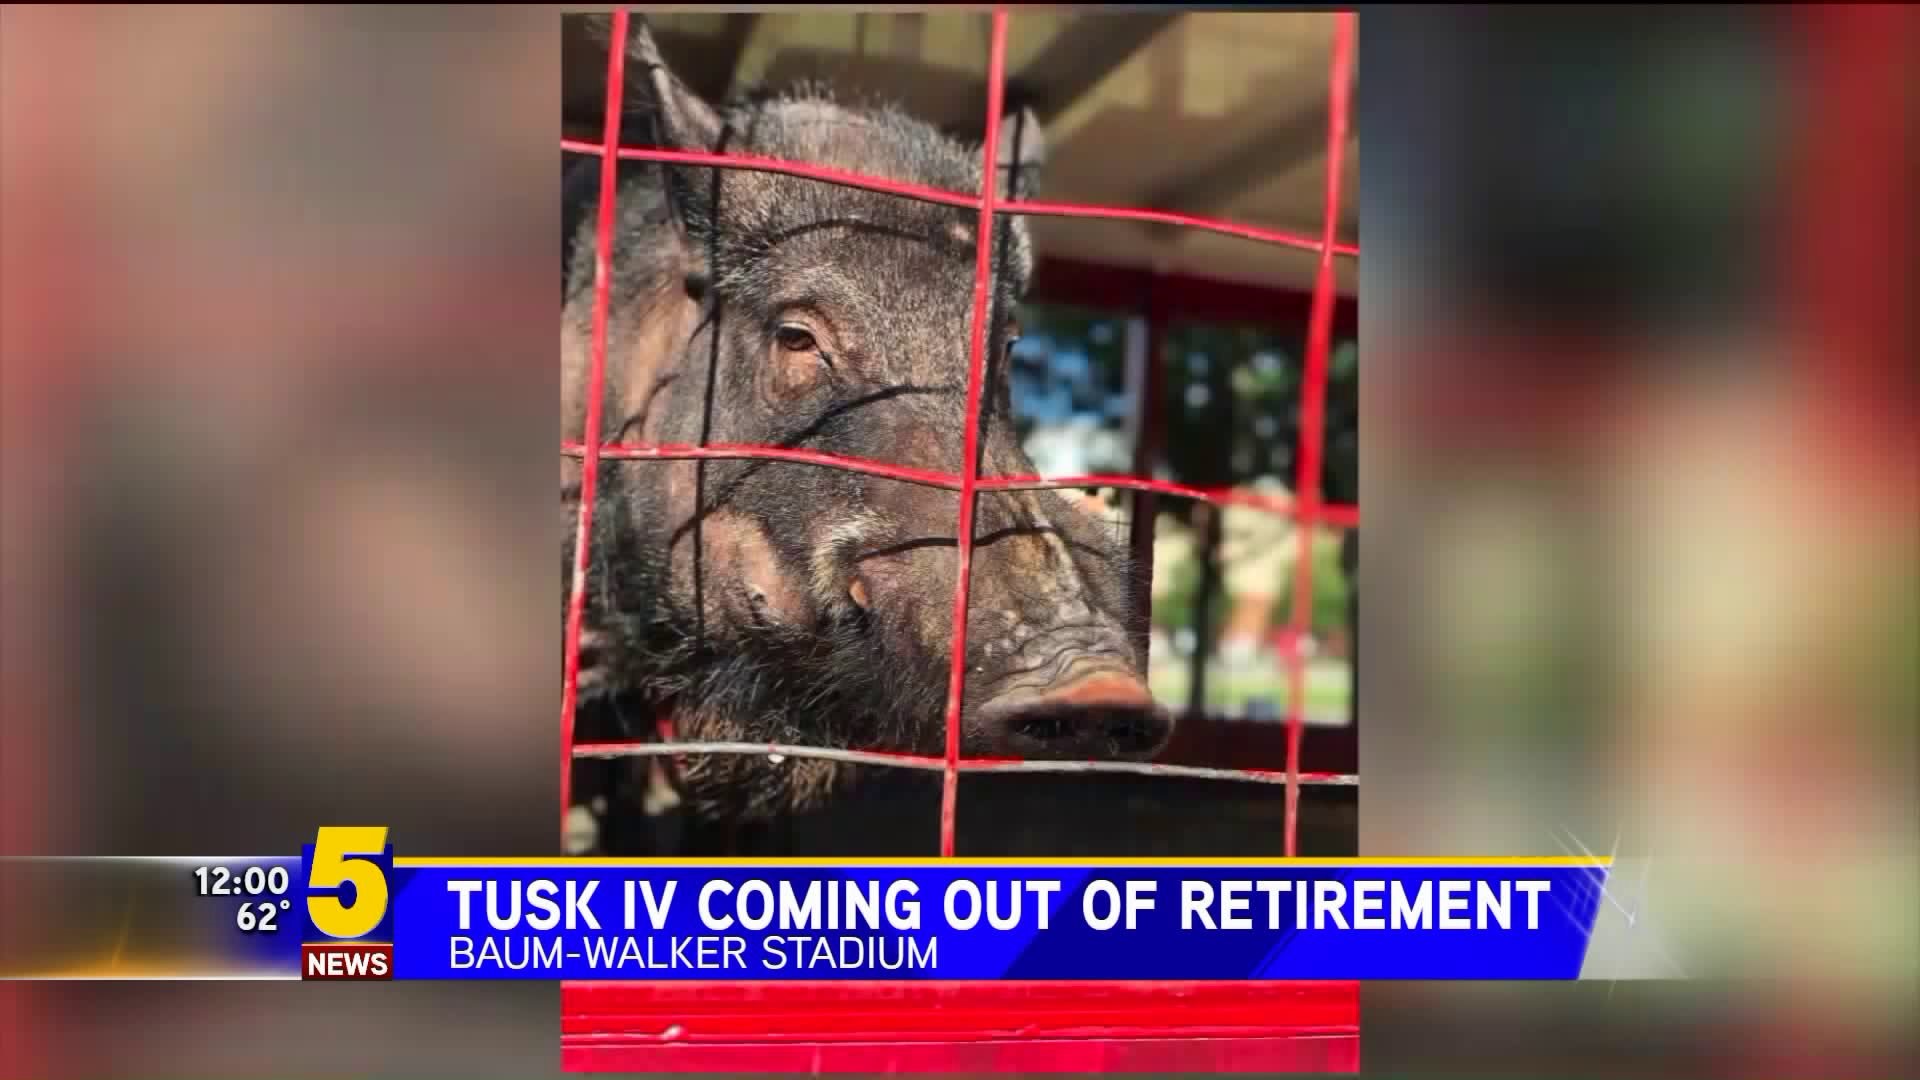 Tusk IV Coming Out Of Retirement